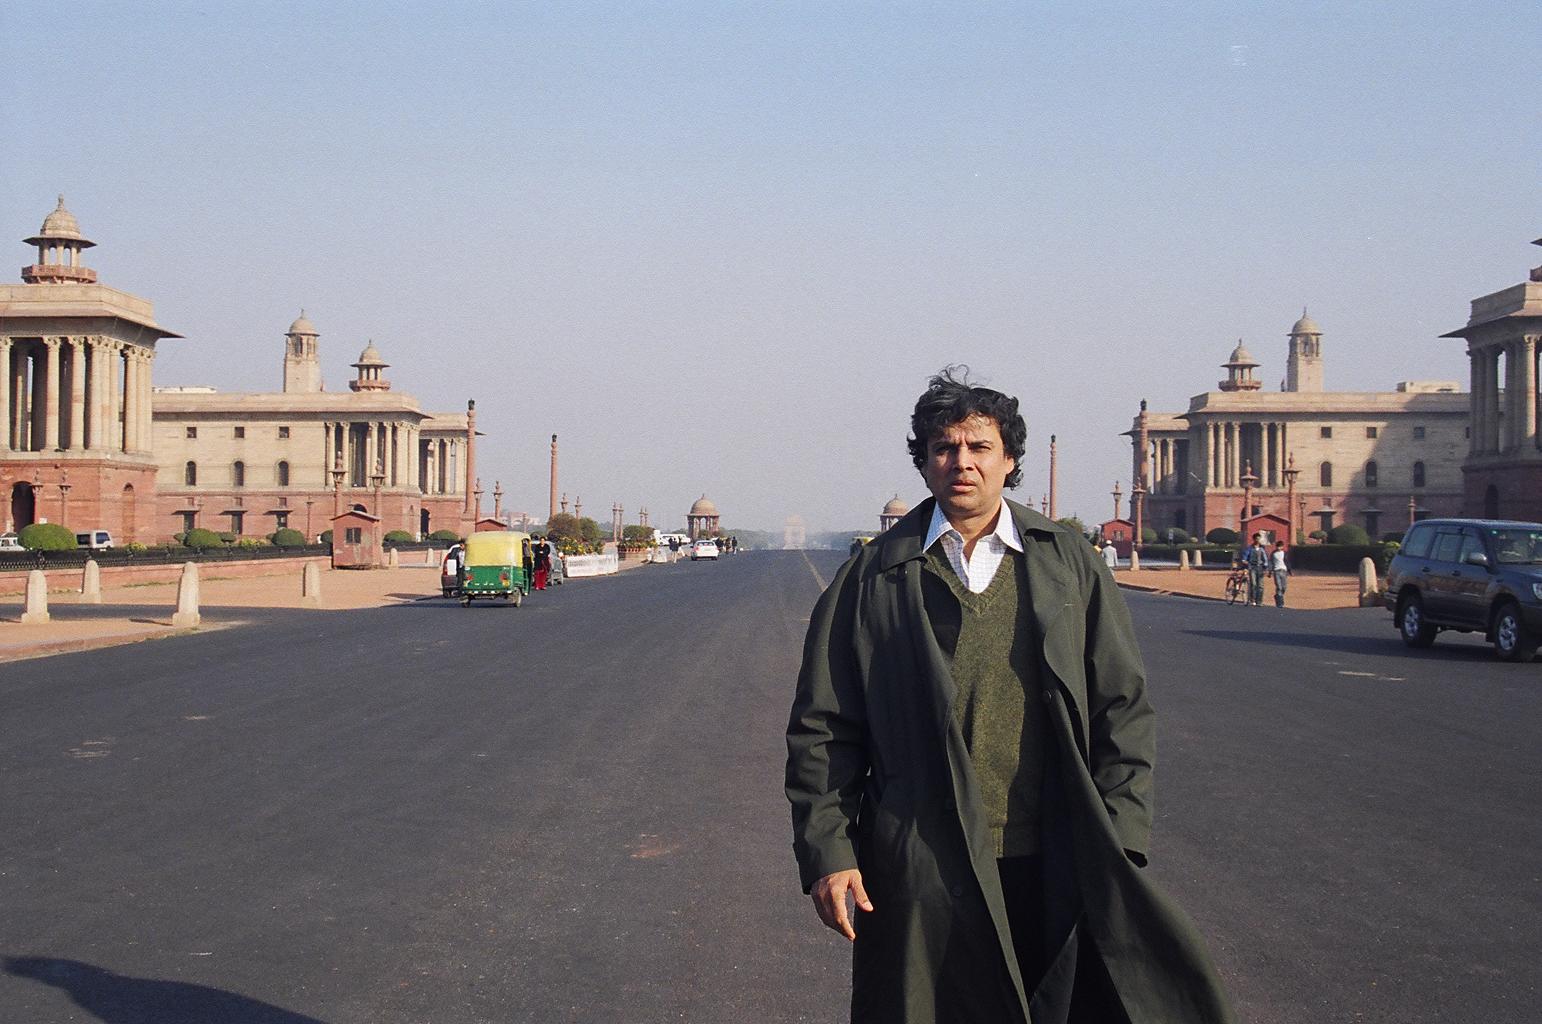 Myself at 50, standing within the 'RASHTRAPATI BHAVAN' perimeter (the Indian OVAL HOUSE); with 'INDIA-GATE' and 'RAJPATH' in the background; New Delhi, INDIA (1/14/08) 